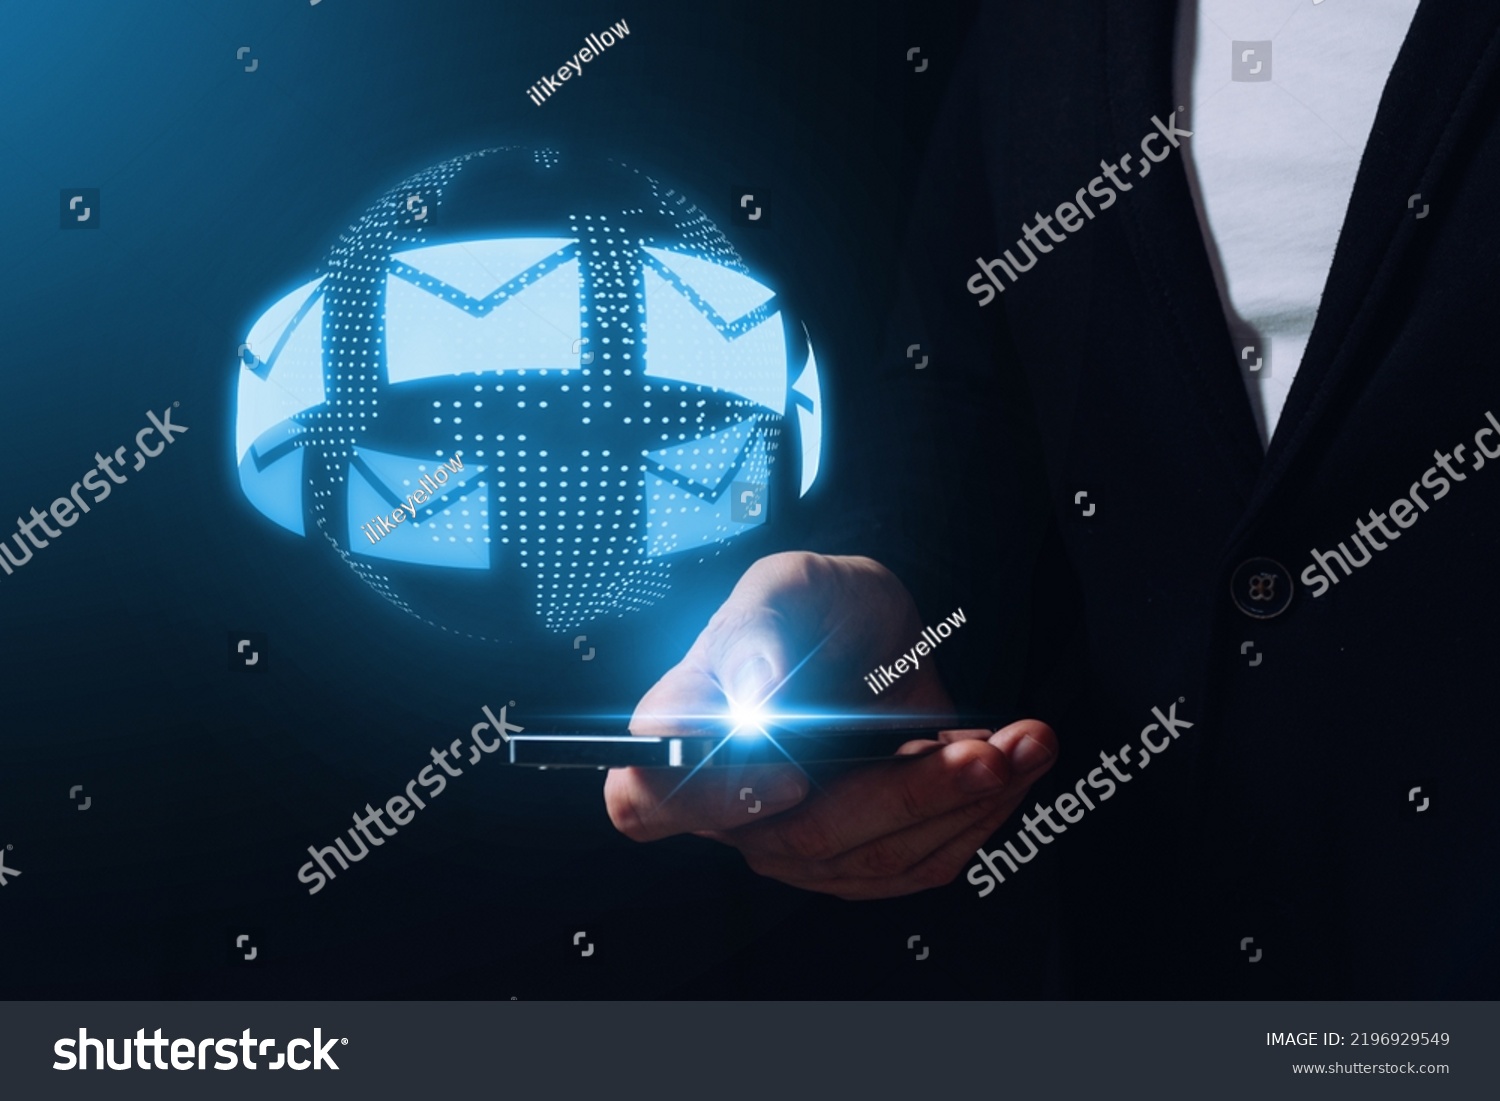 Message and email. Communication around the world via the Internet and instant messengers. The person is holding a smartphone with a hologram #2196929549